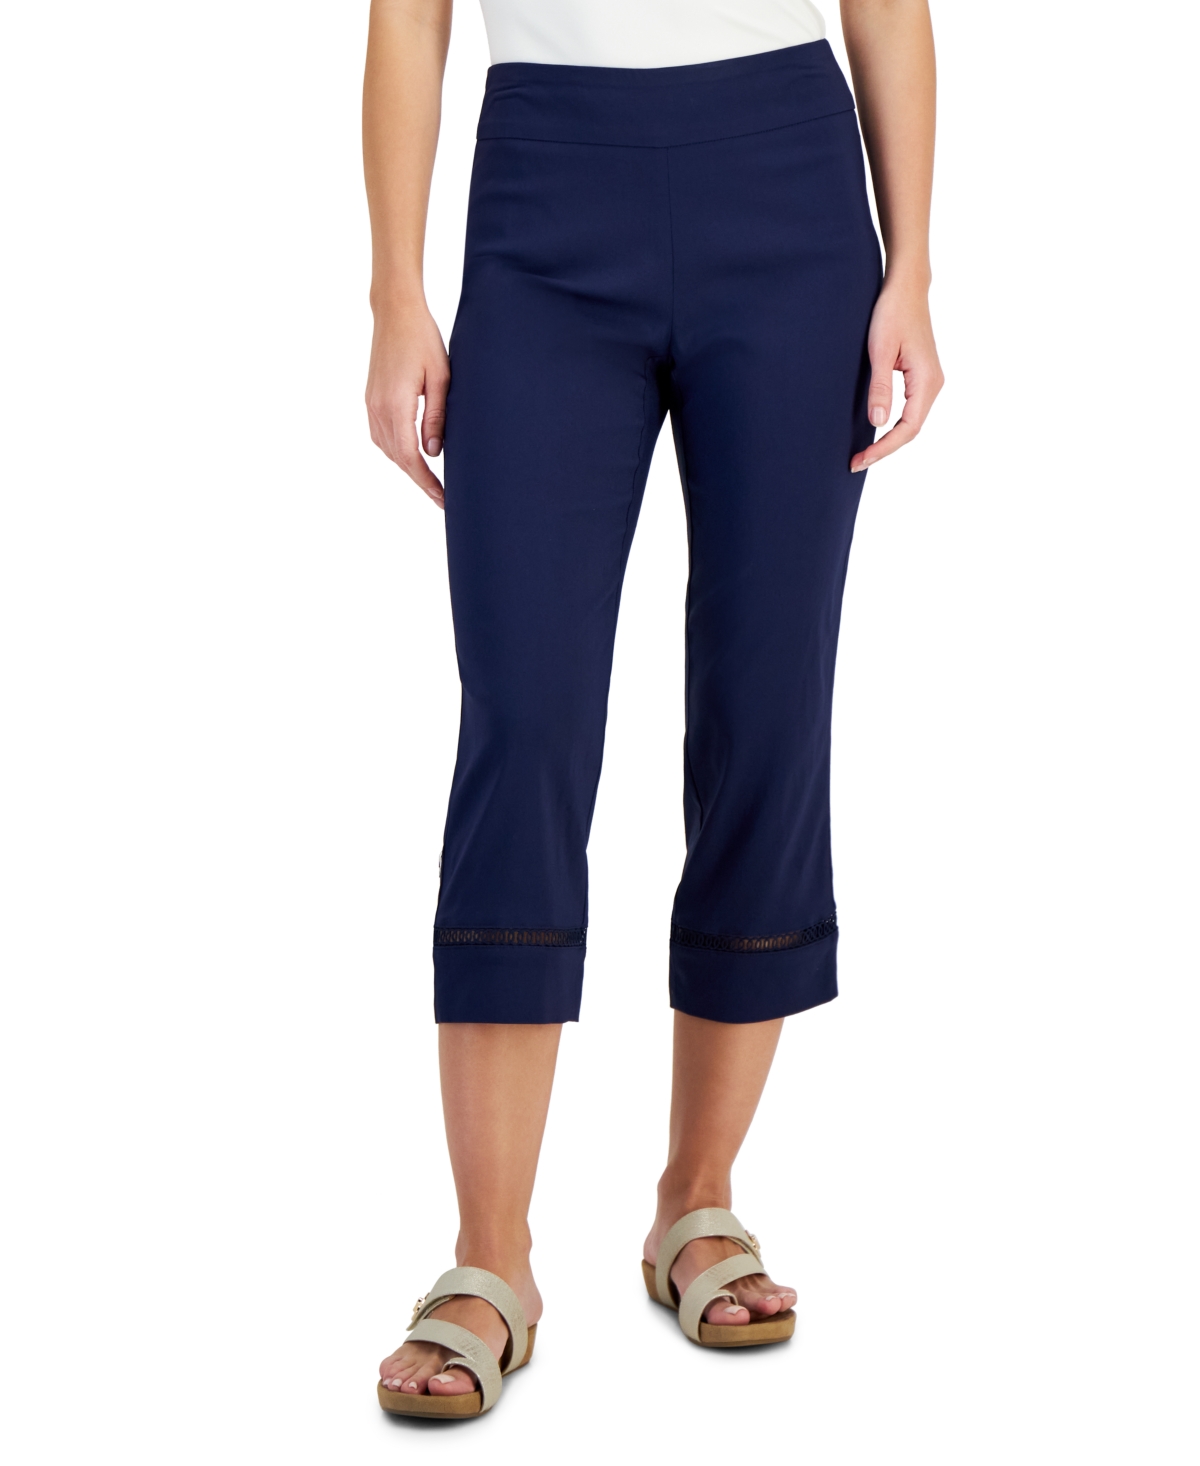 Women's Woven Lace-Trim Capri Pull-On Pants, Created for Macy's - Intrepid Blue